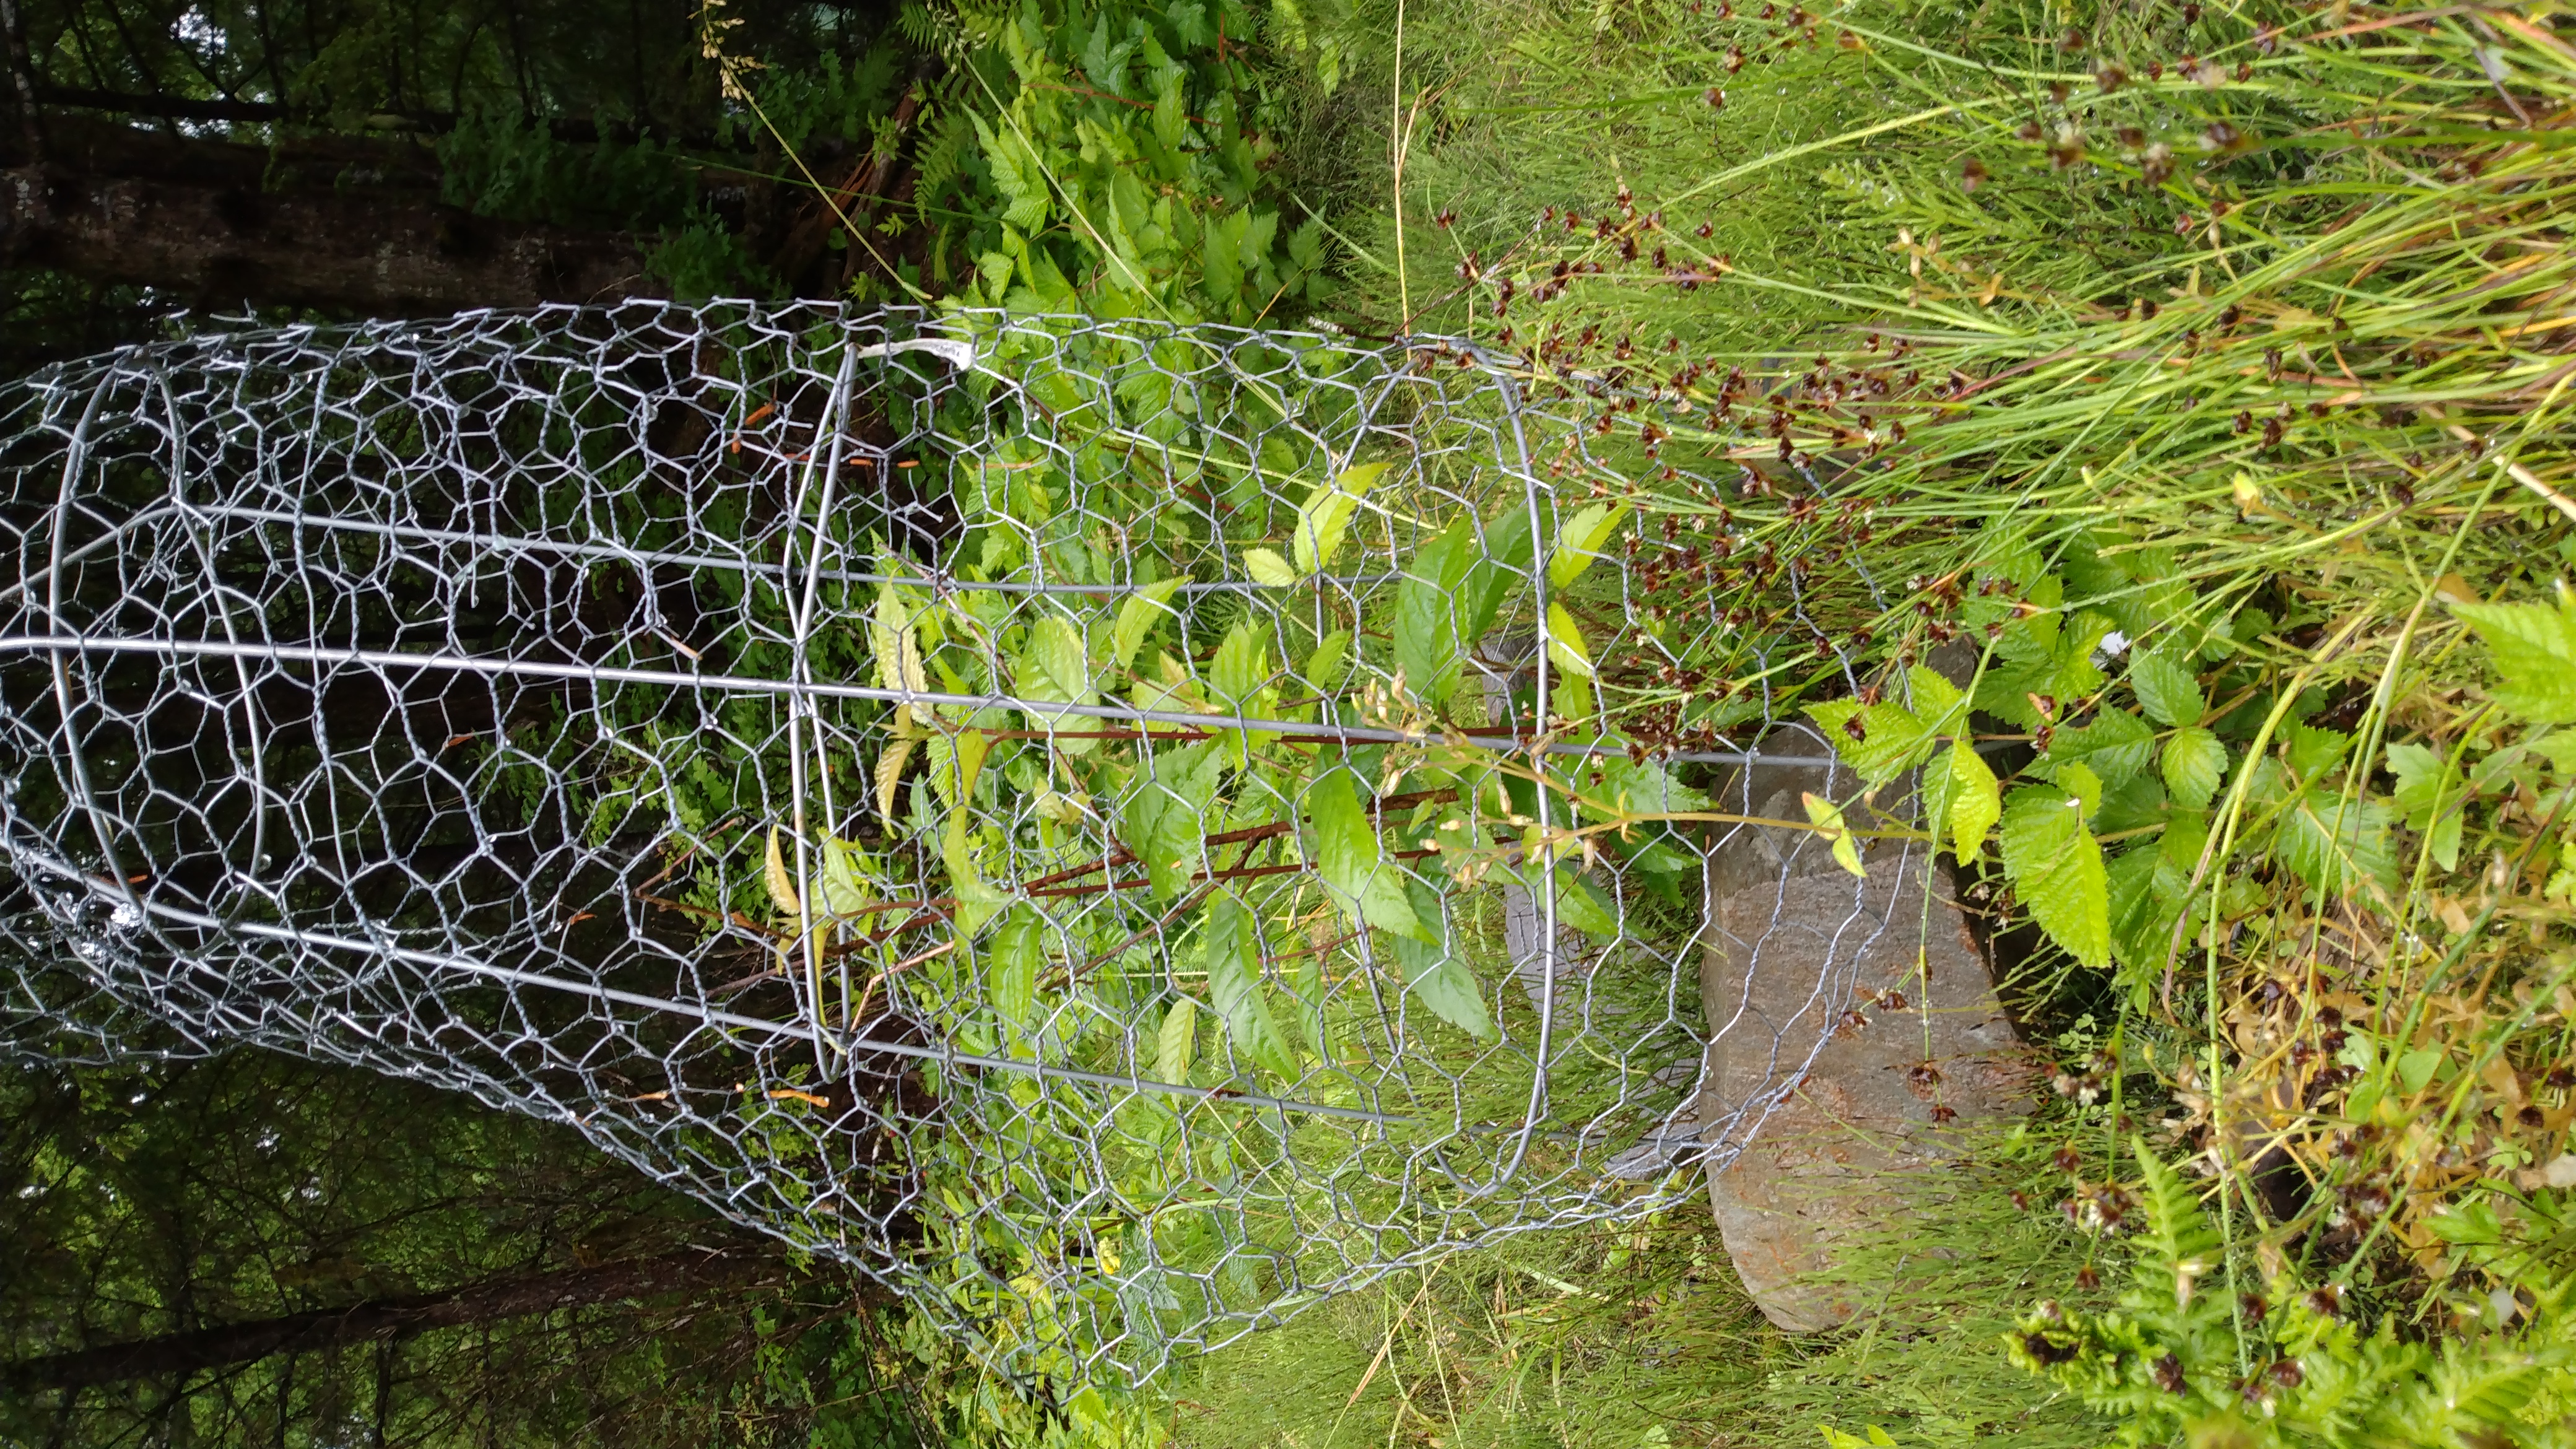 A foot-high cherry tree inside a chicken-wire enclosure, with other weeds and shrubs nearby and larger trees in the middle distance behind. All is green